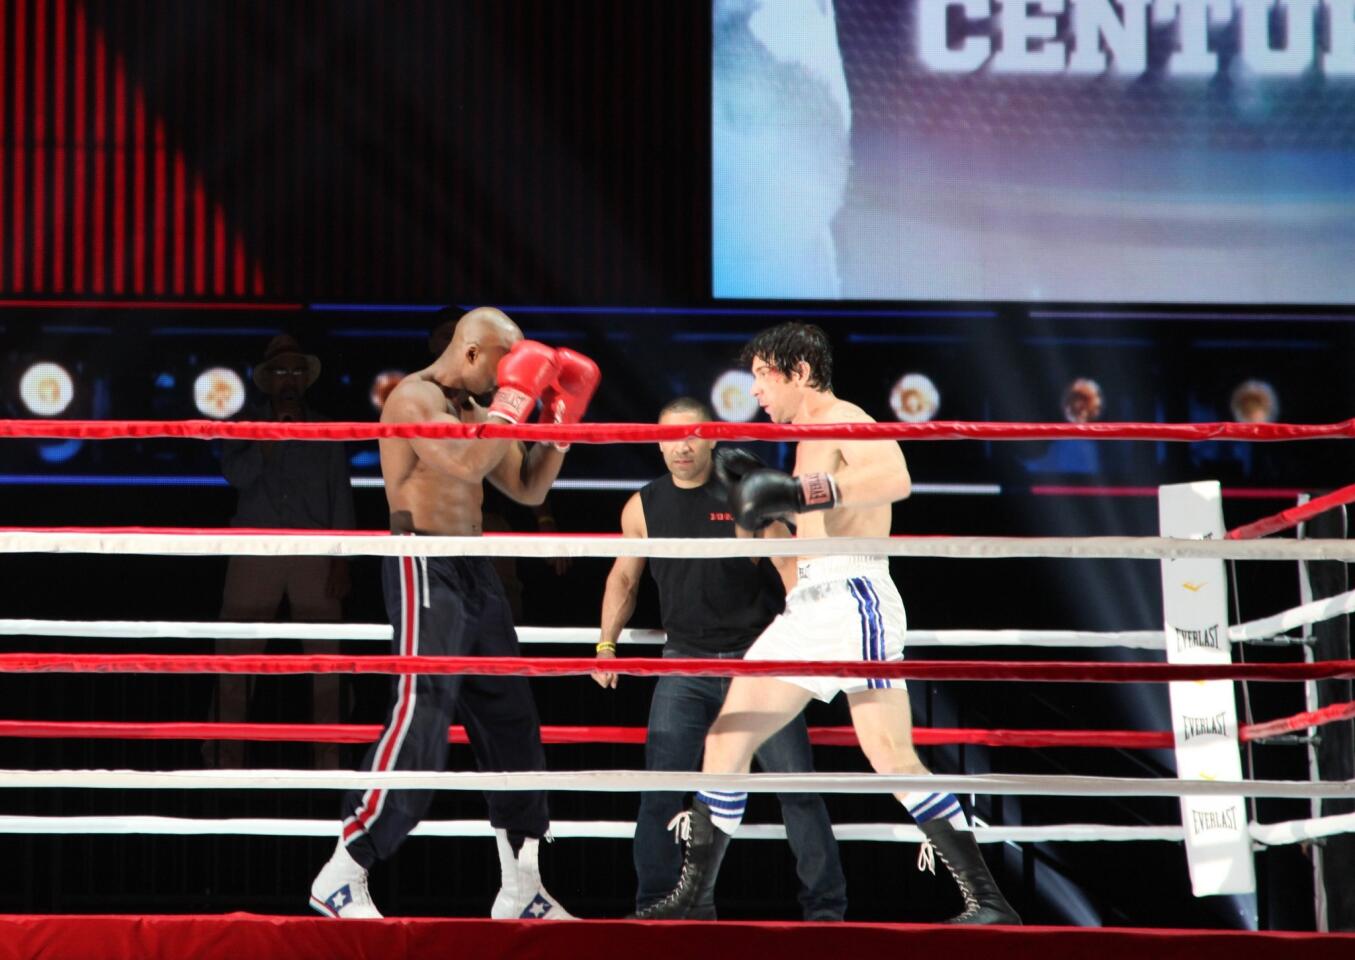 Could Broadway help boxing?